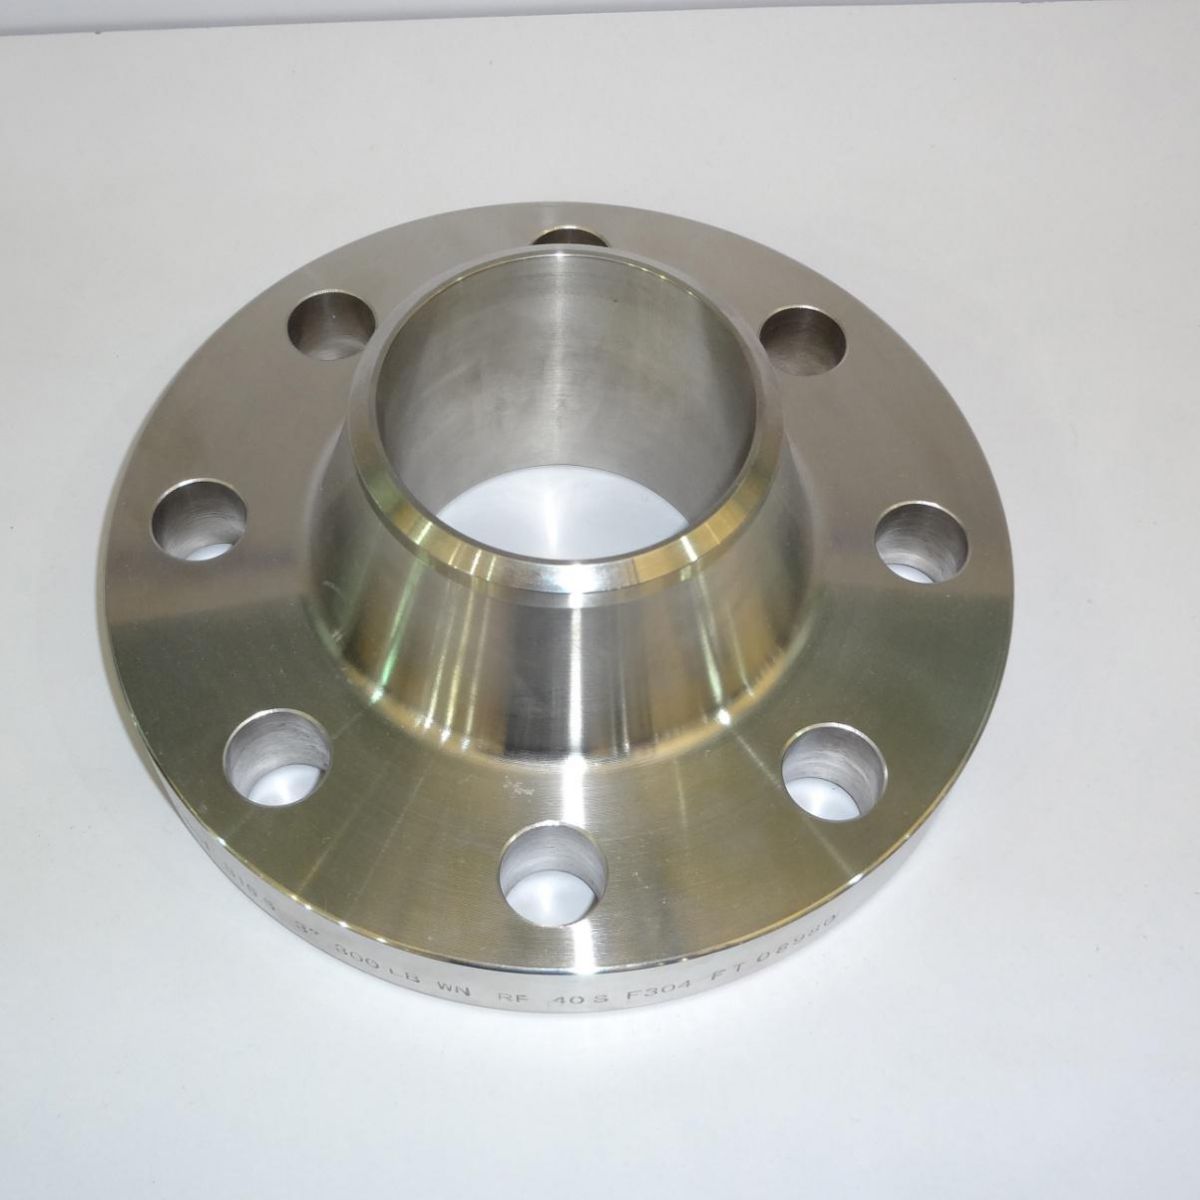 Astm A182 F304 Wn Rf Stainless Steel Flange 2 12in Sch 40s 600lb Derbo 4513